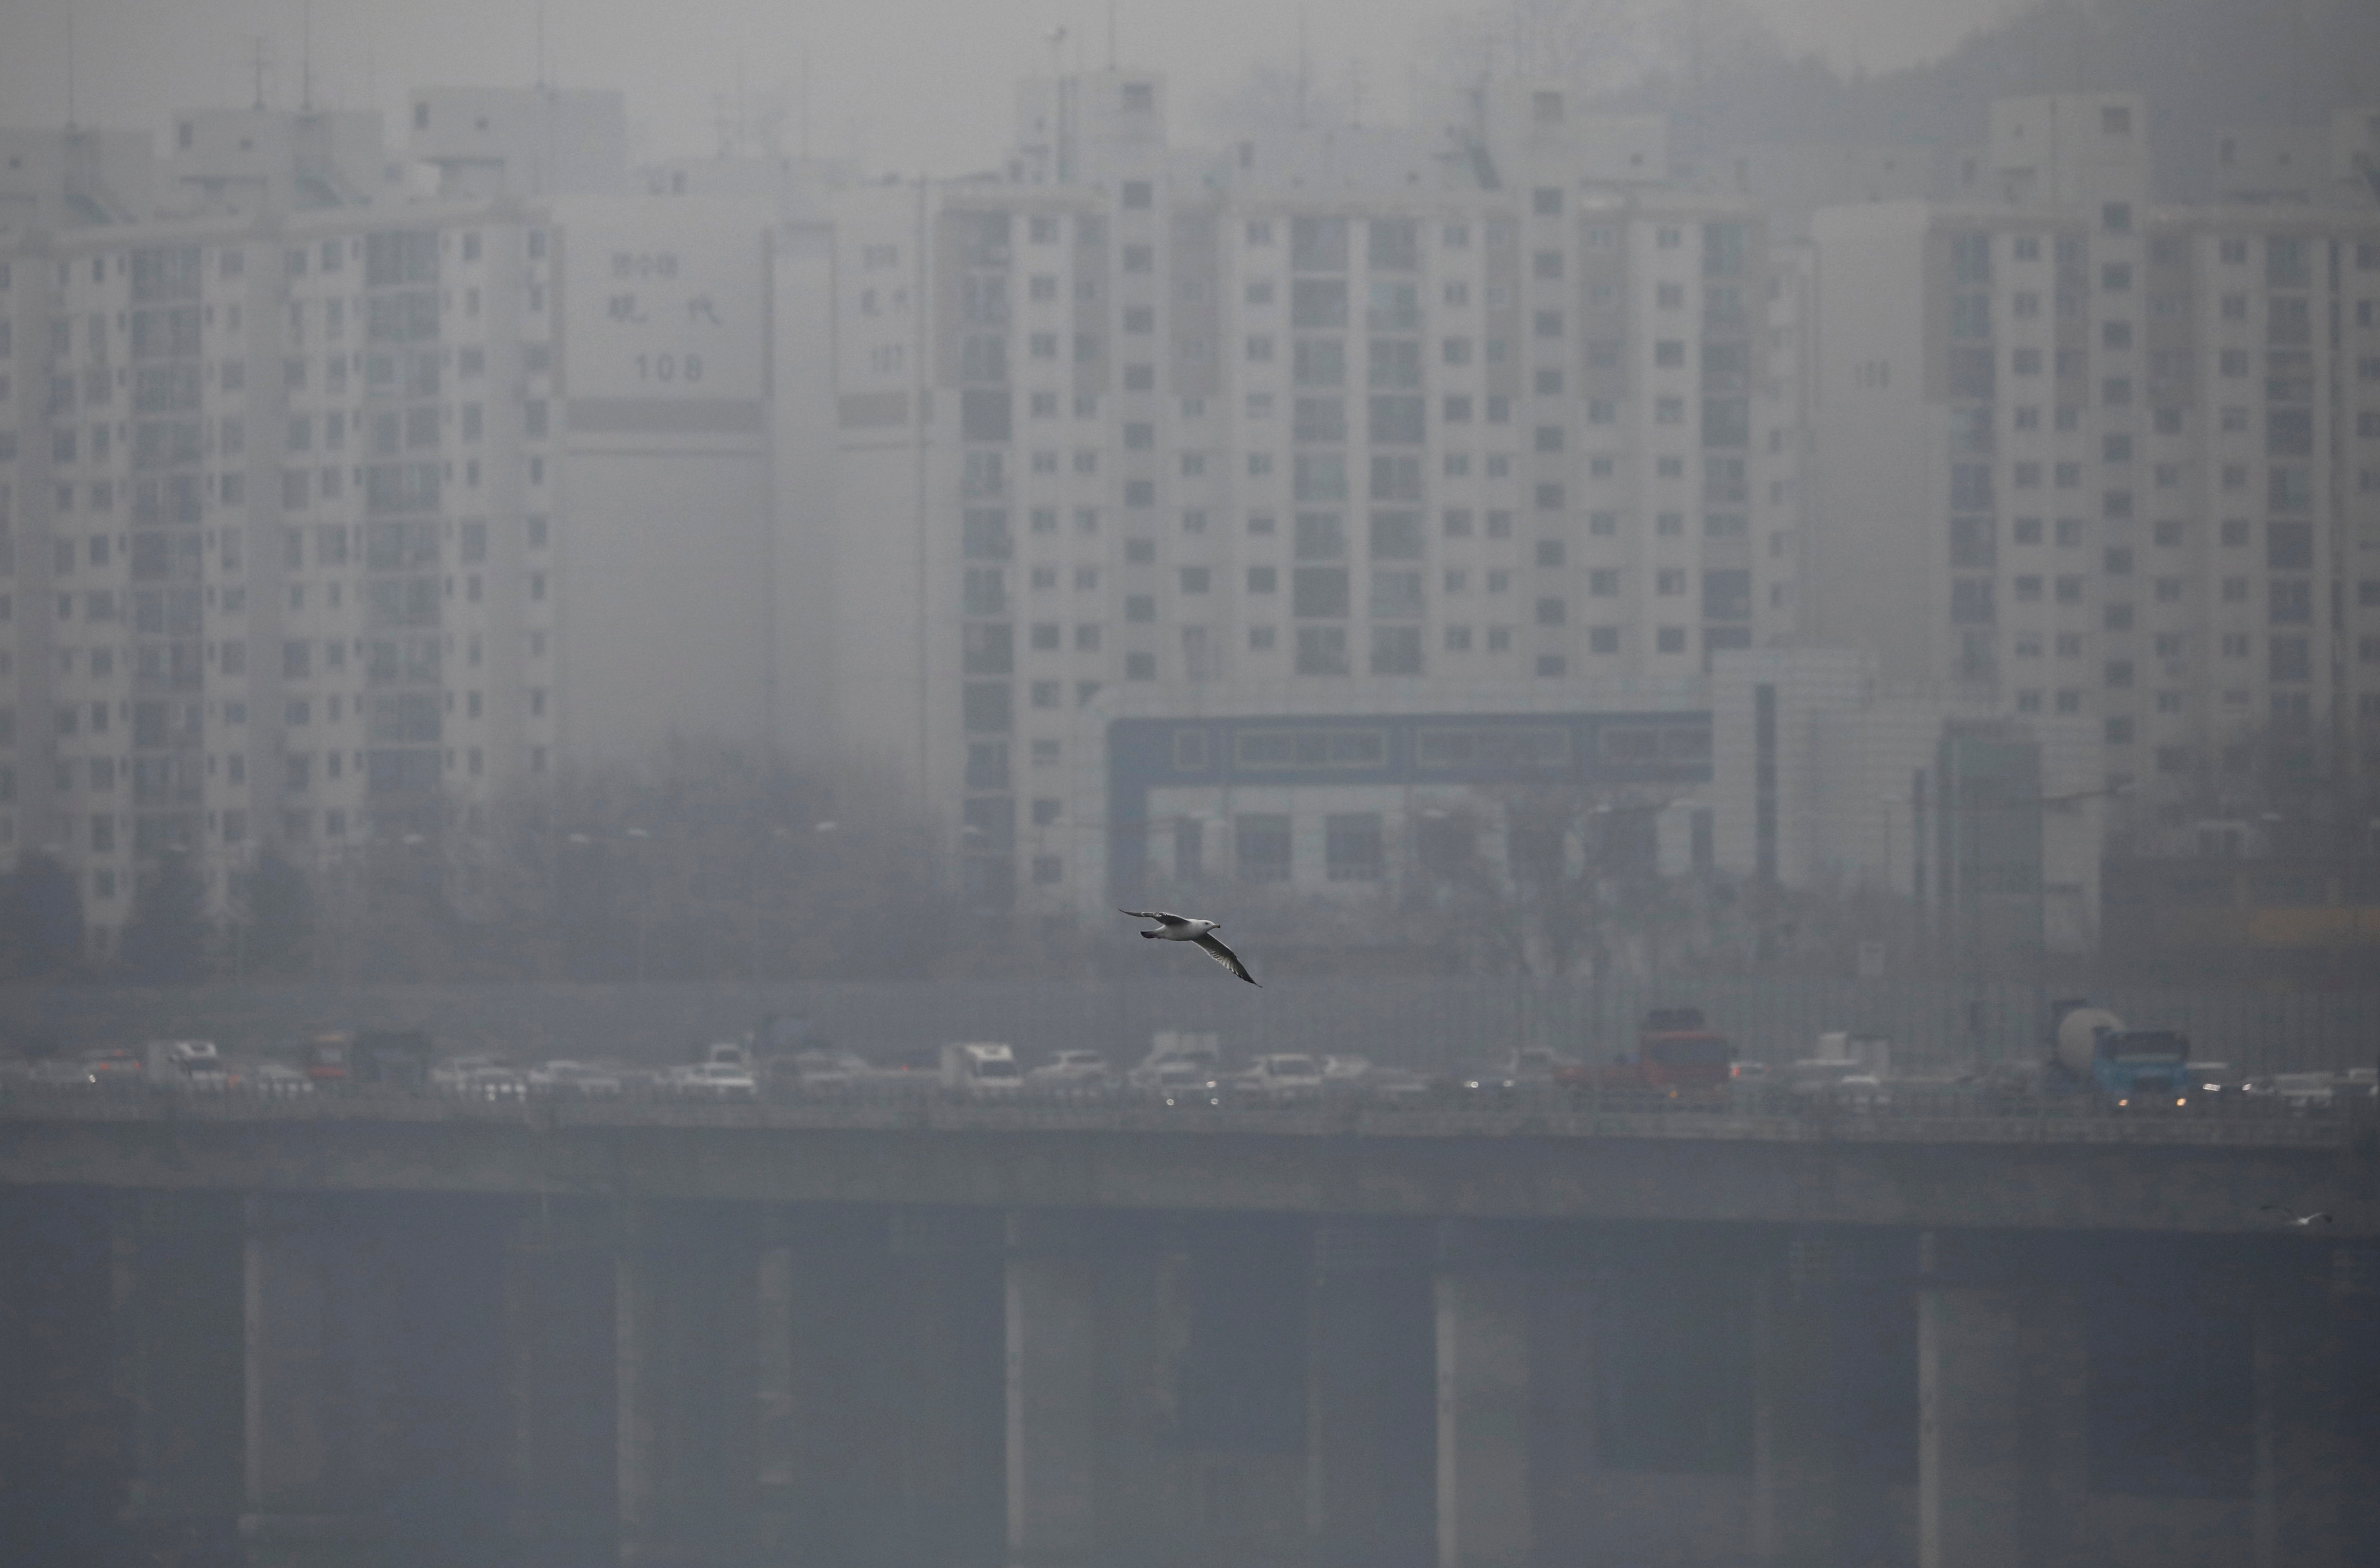 A bird flies on a polluted day in Seoul